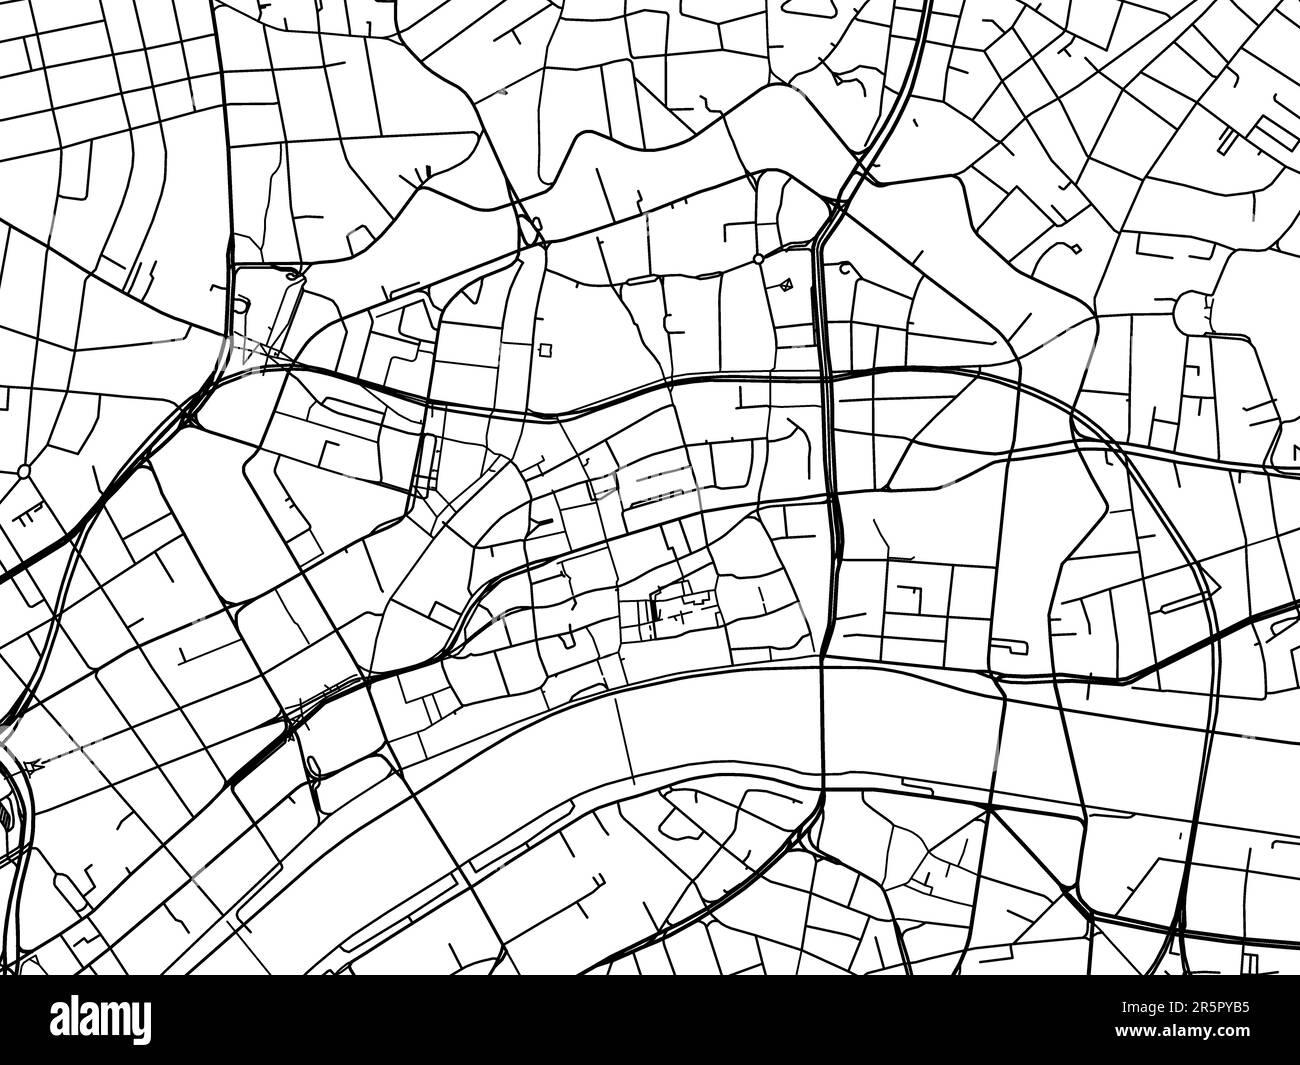 Vector road map of the city of  Frankfurt am Main Zentrum in Germany on a white background. Stock Photo